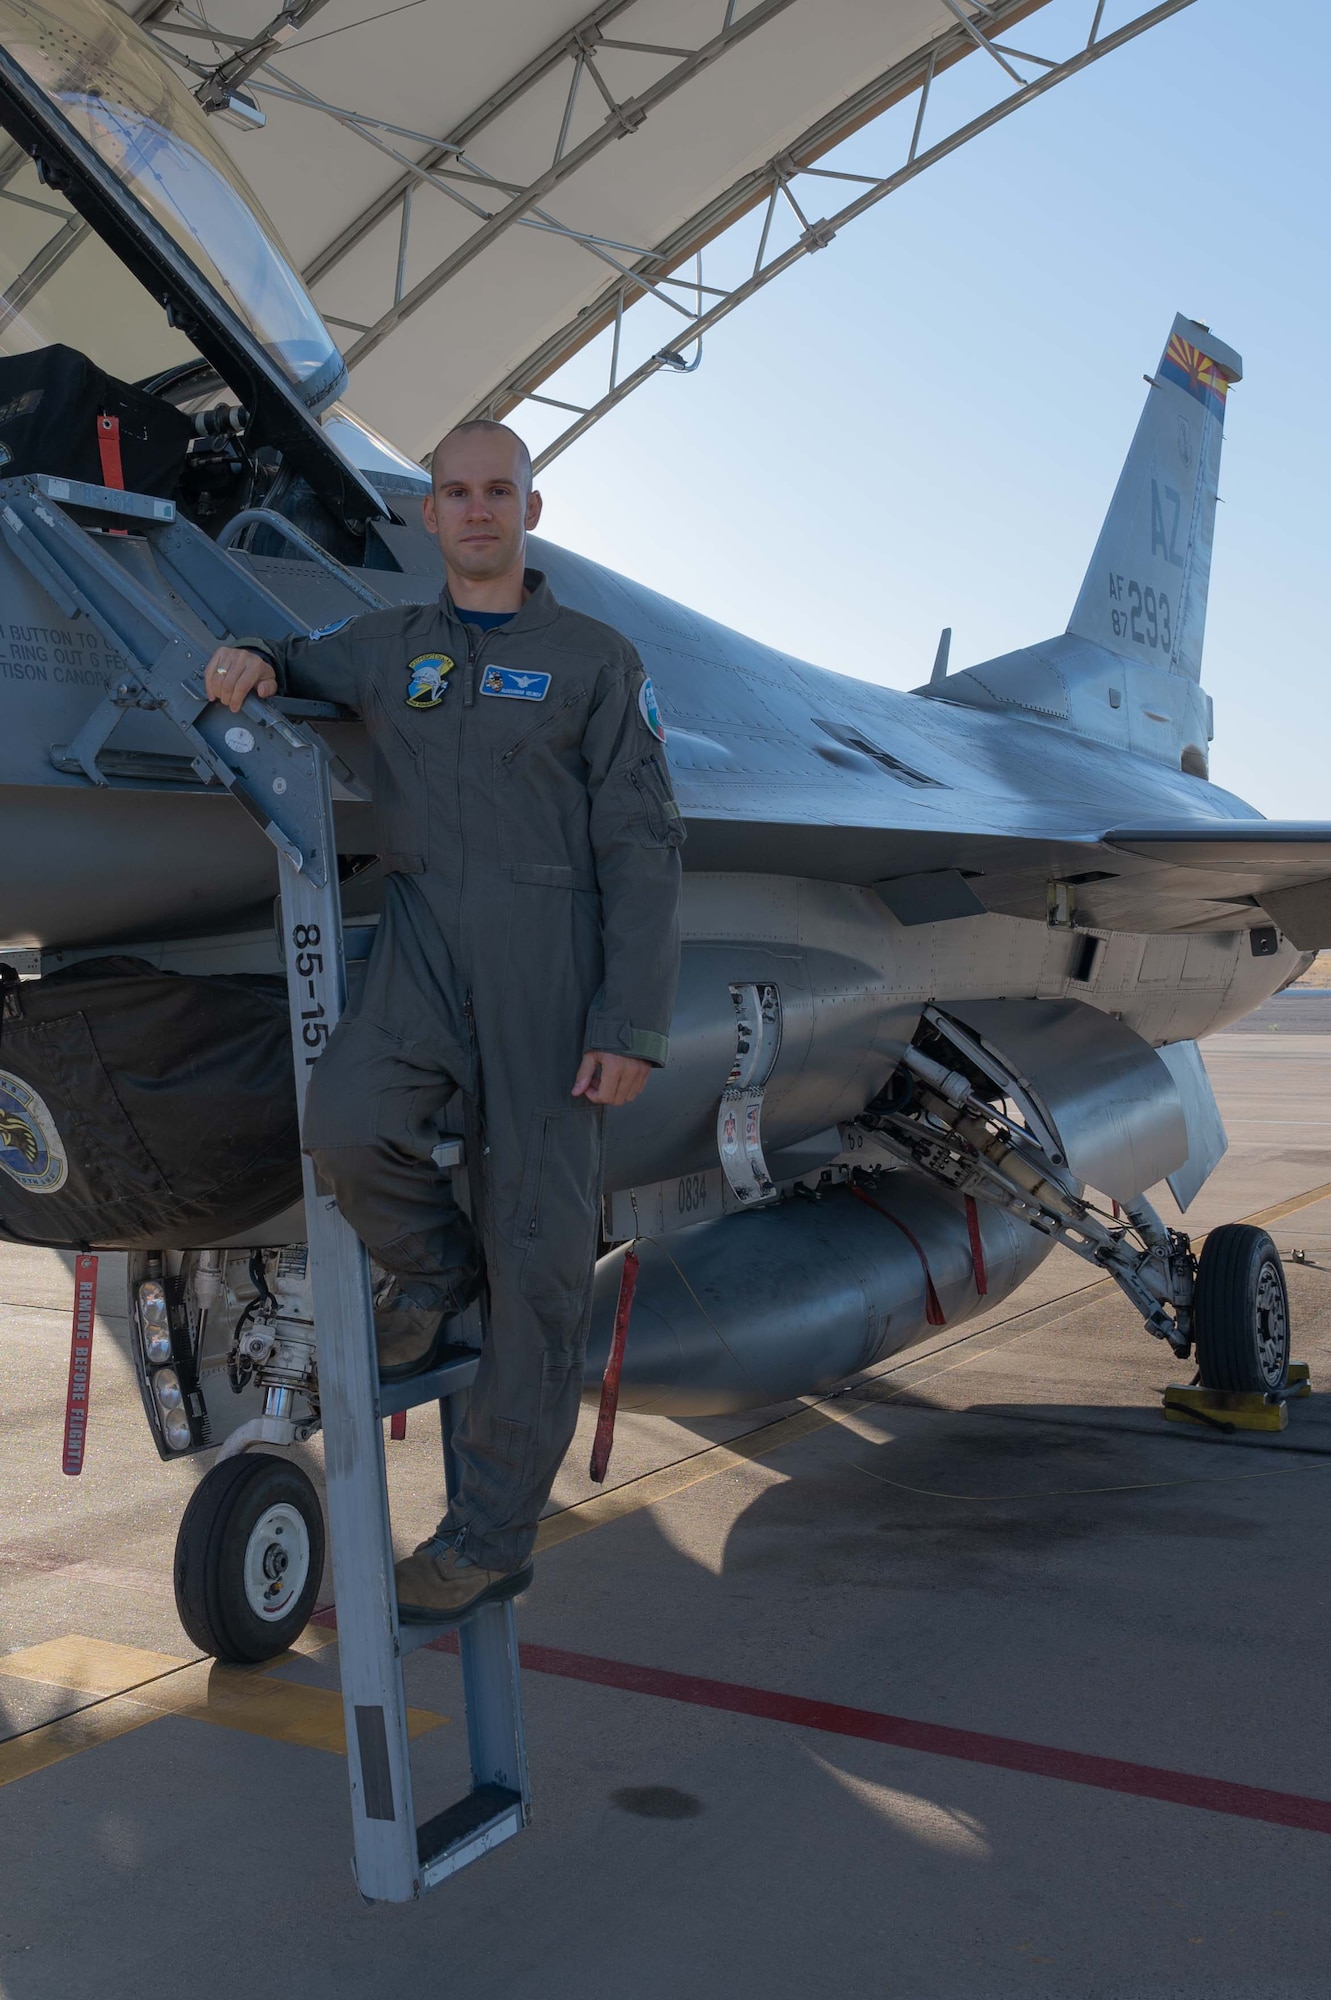 Capt. Aleksandar Velinov, a Bulgaria air force F-16 pilot, is the first pilot from his country to graduate from the 162nd Wing's international pilot training program.